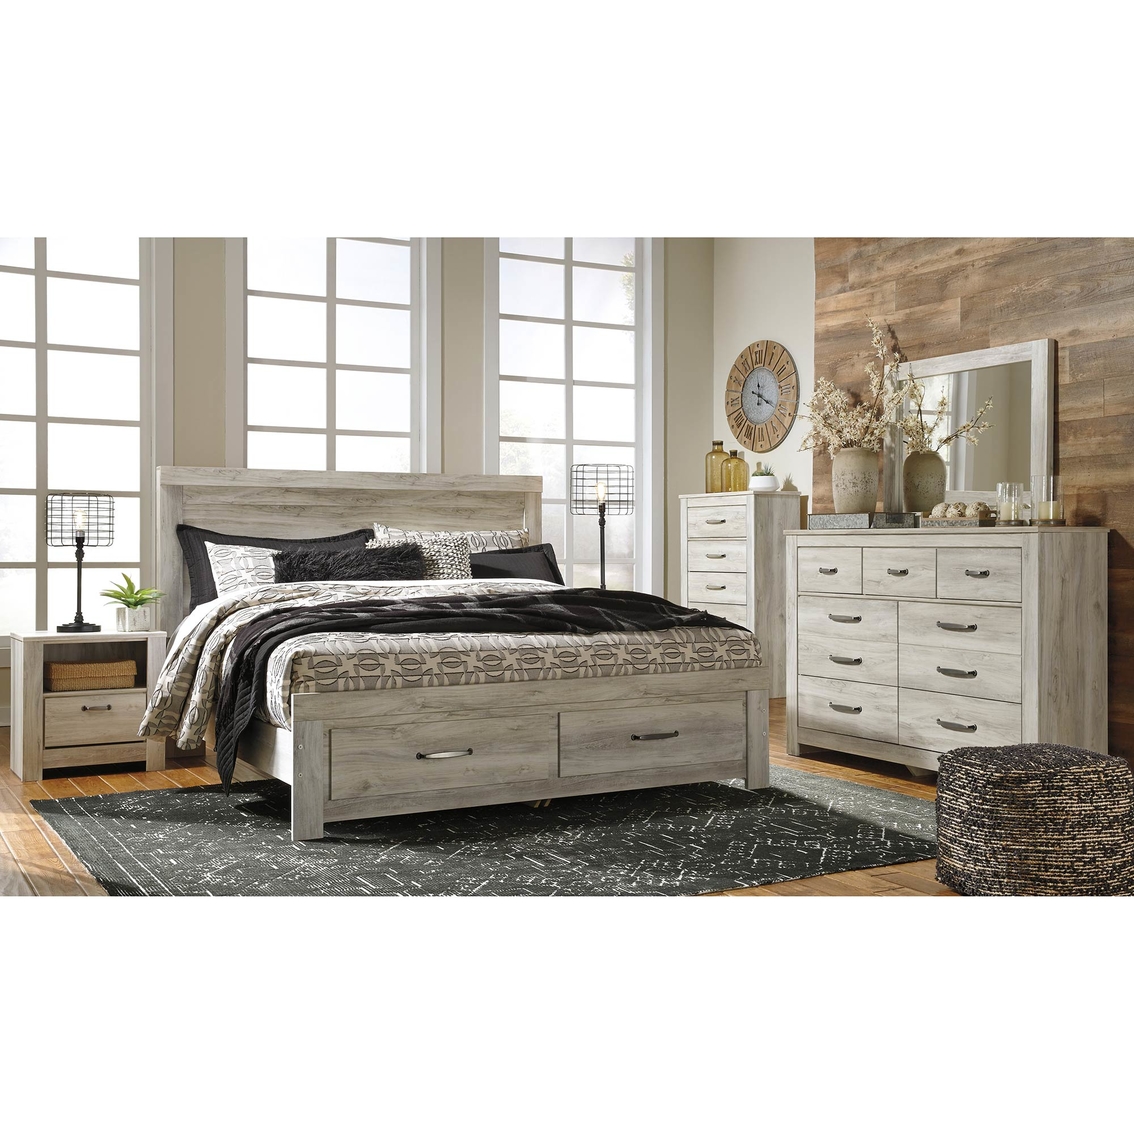 Signature Design By Ashley Bellaby 5 Pc Storage Bed Set Bedroom